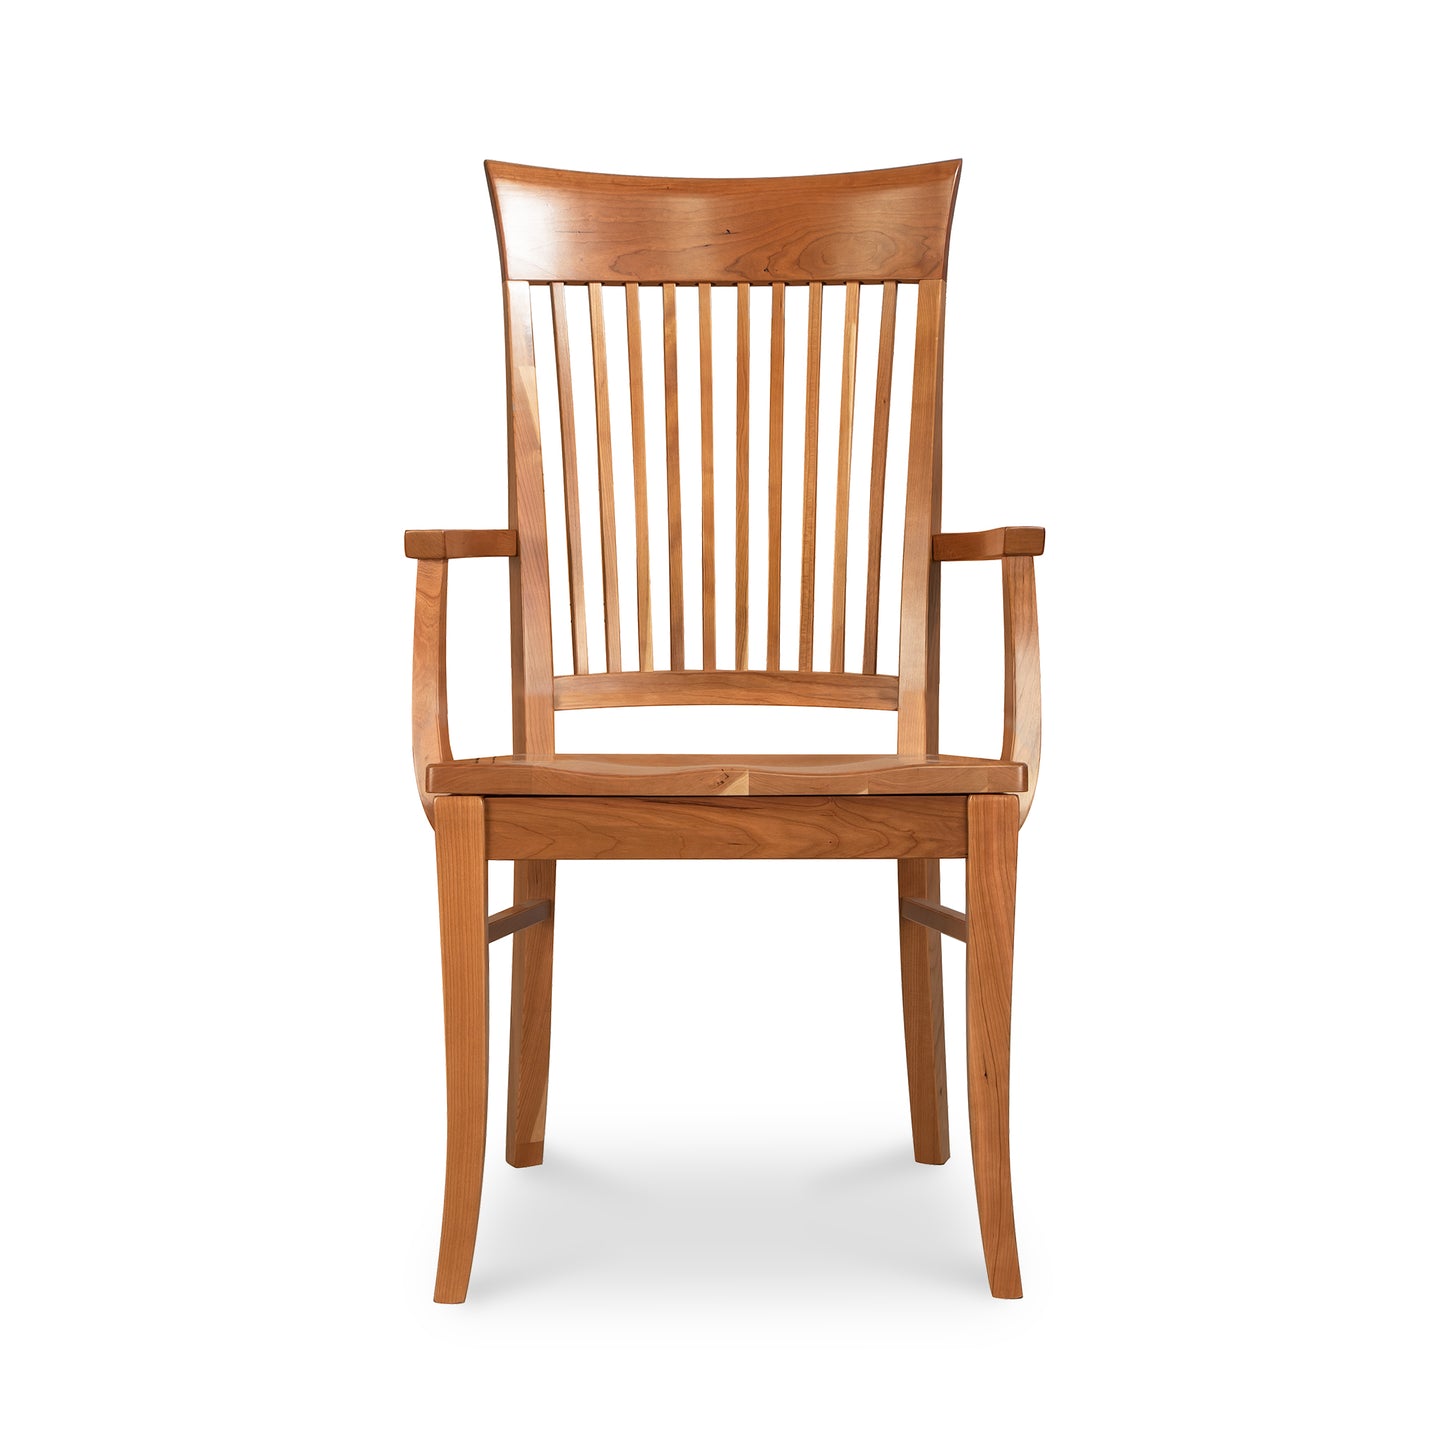 A wooden chair with slats on a white background.